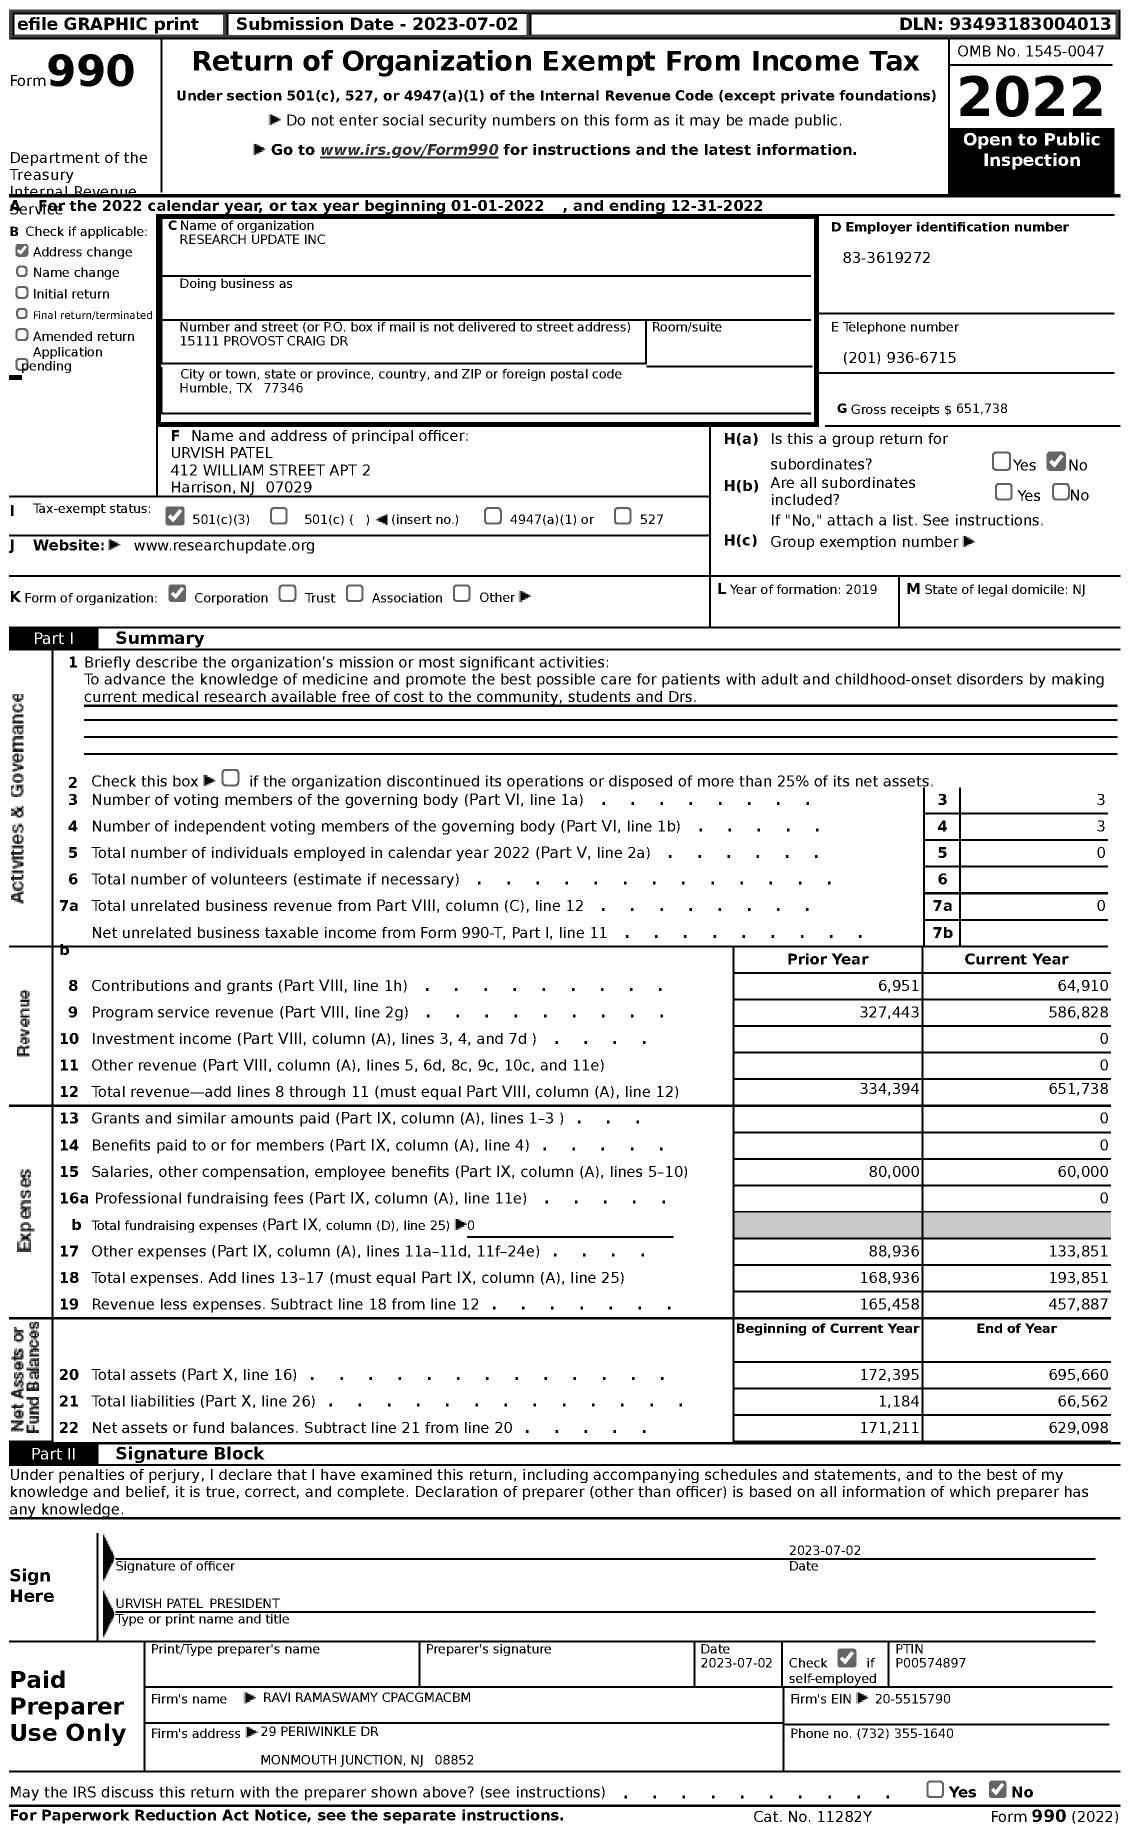 Image of first page of 2022 Form 990 for Research Update